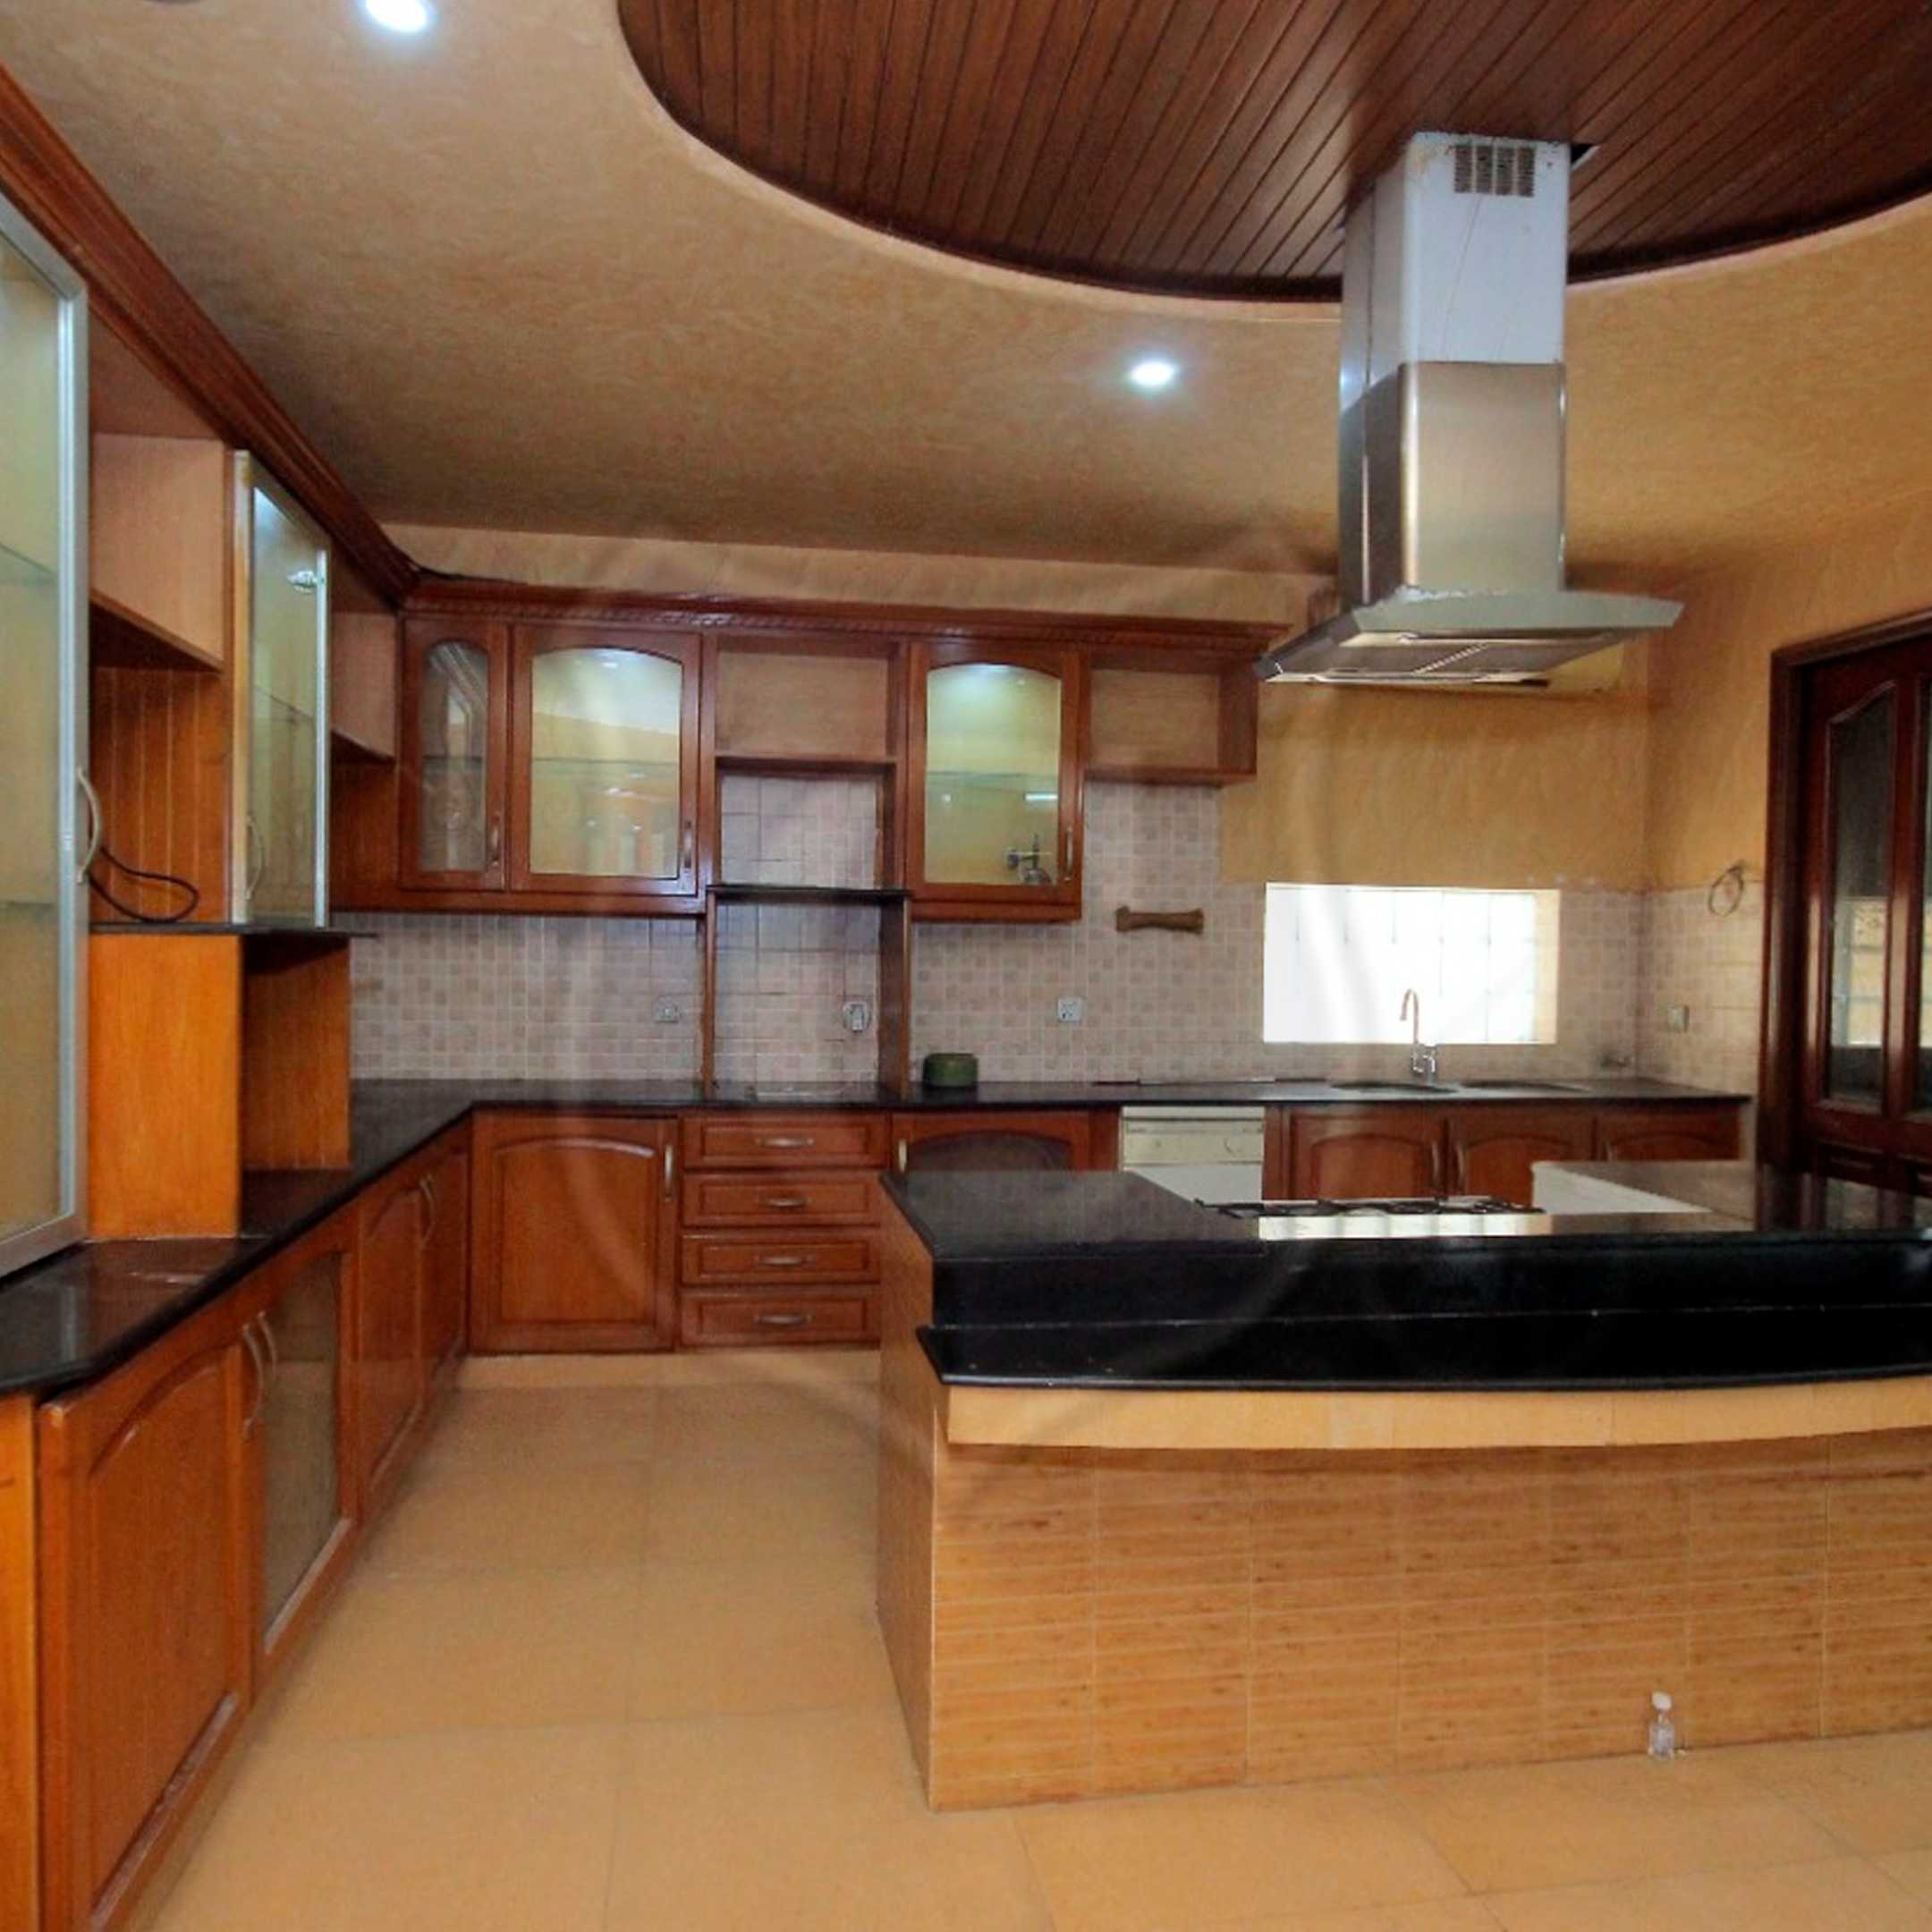 2 Kanal House For Rent in Phase 2